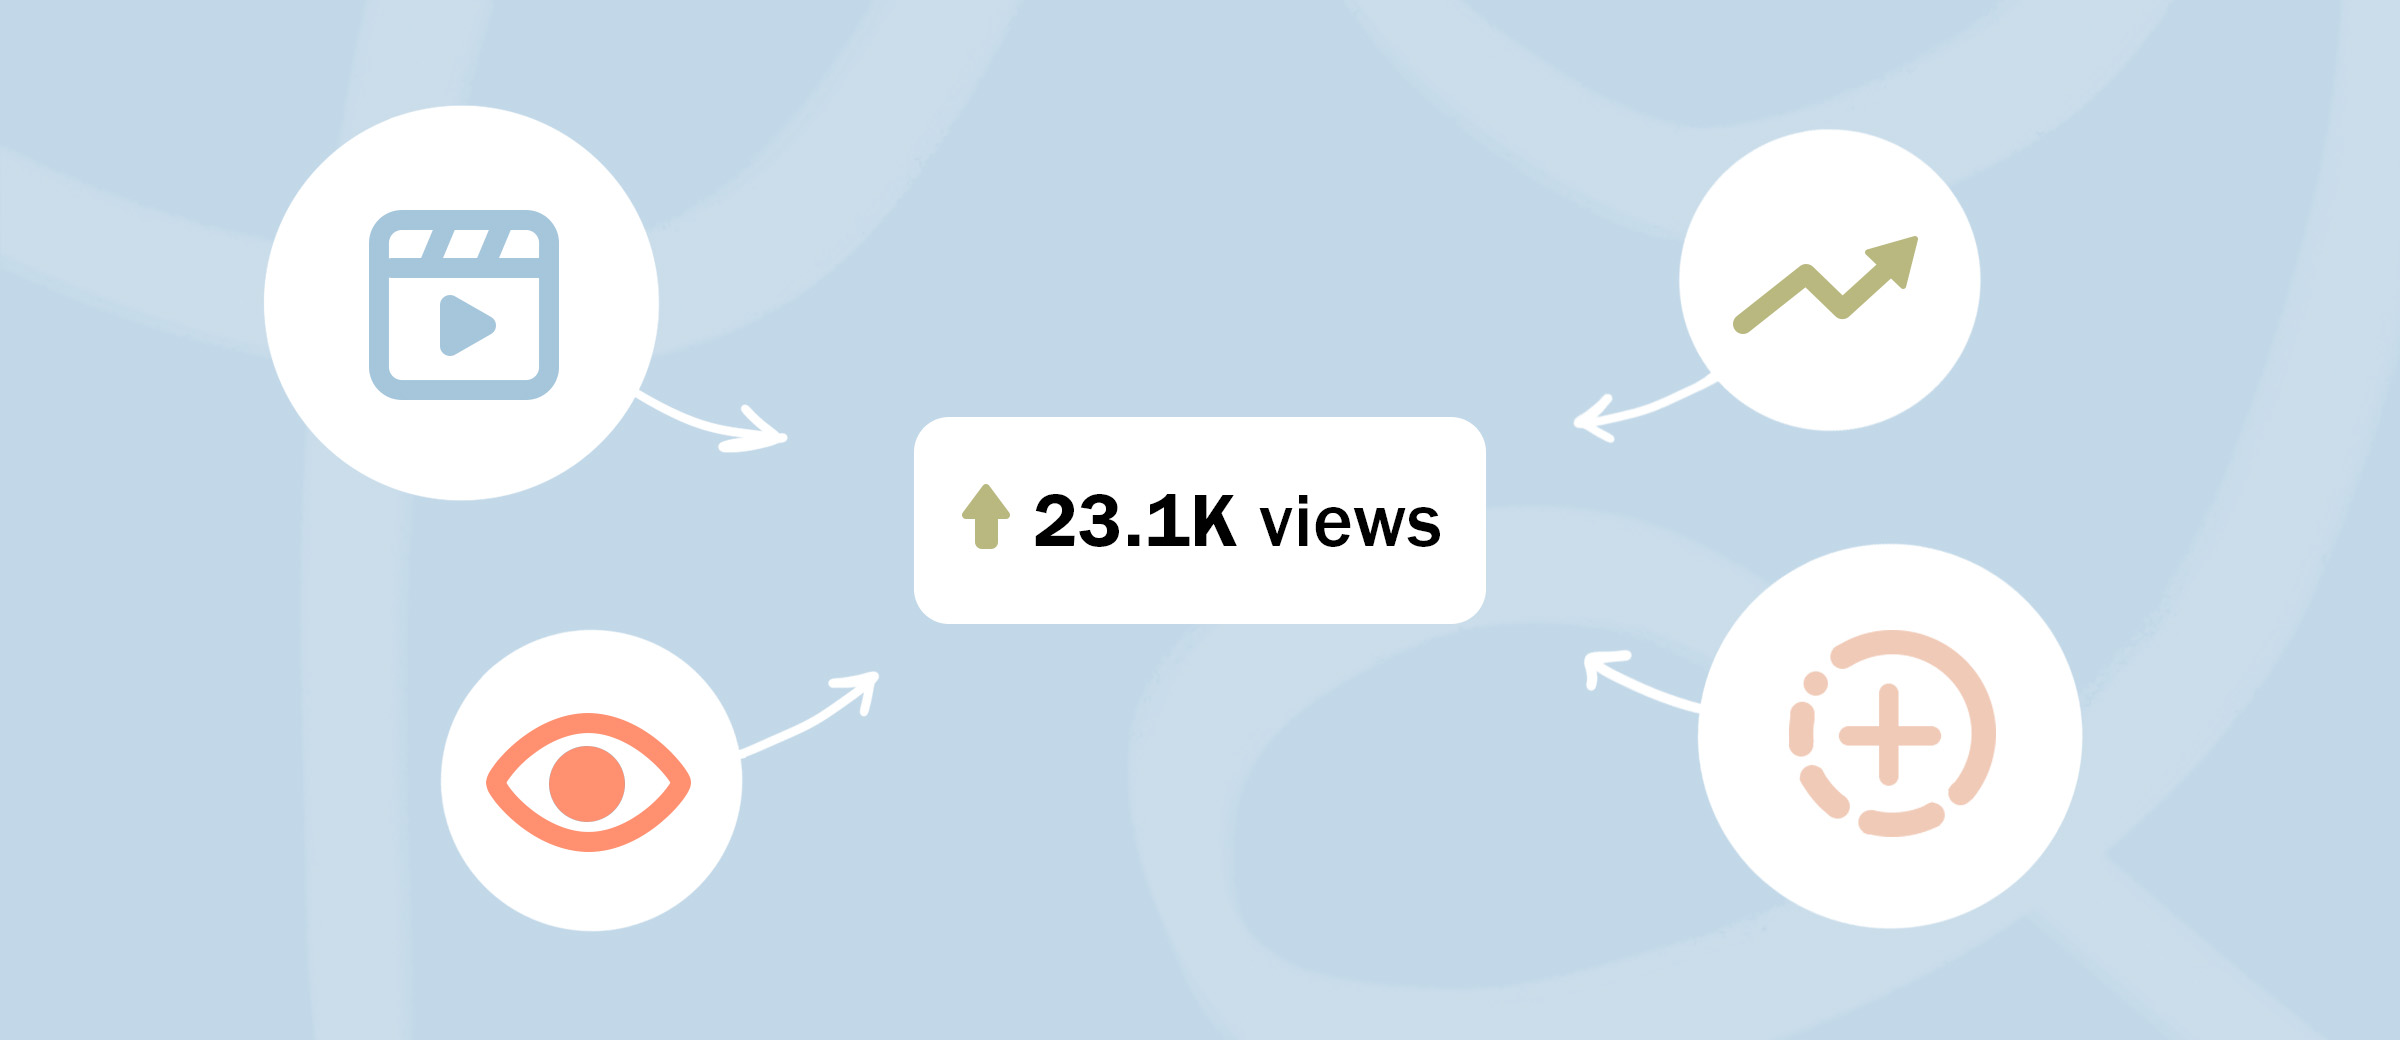 Read about How to Get More Views on Instagram Using Reels, on PLANOLY